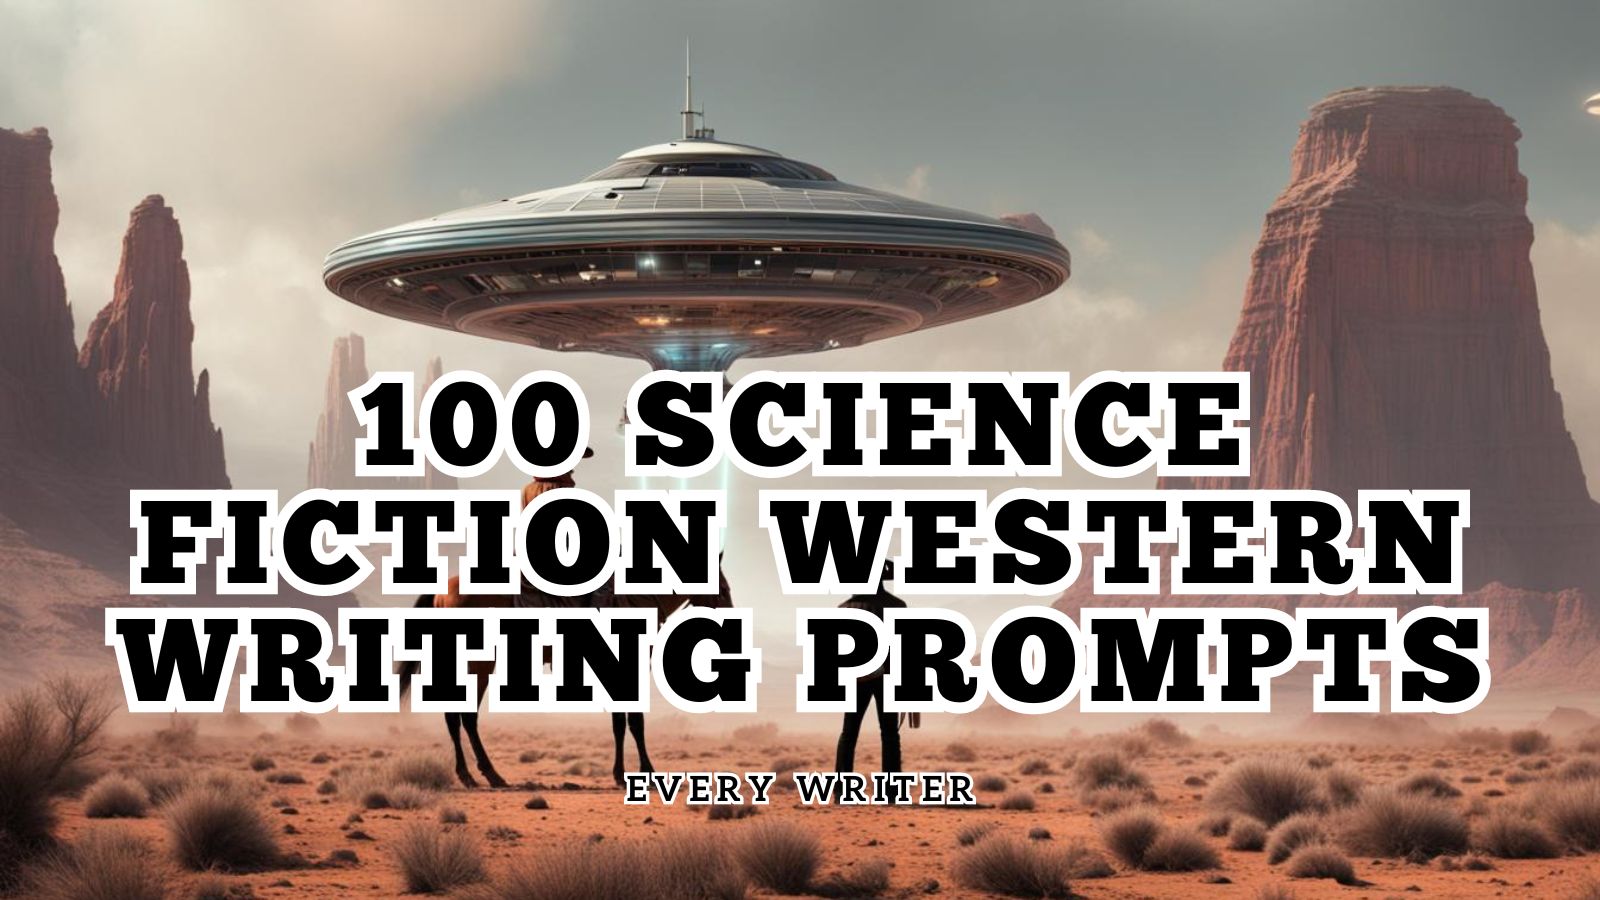 100 science fiction western writing prompts